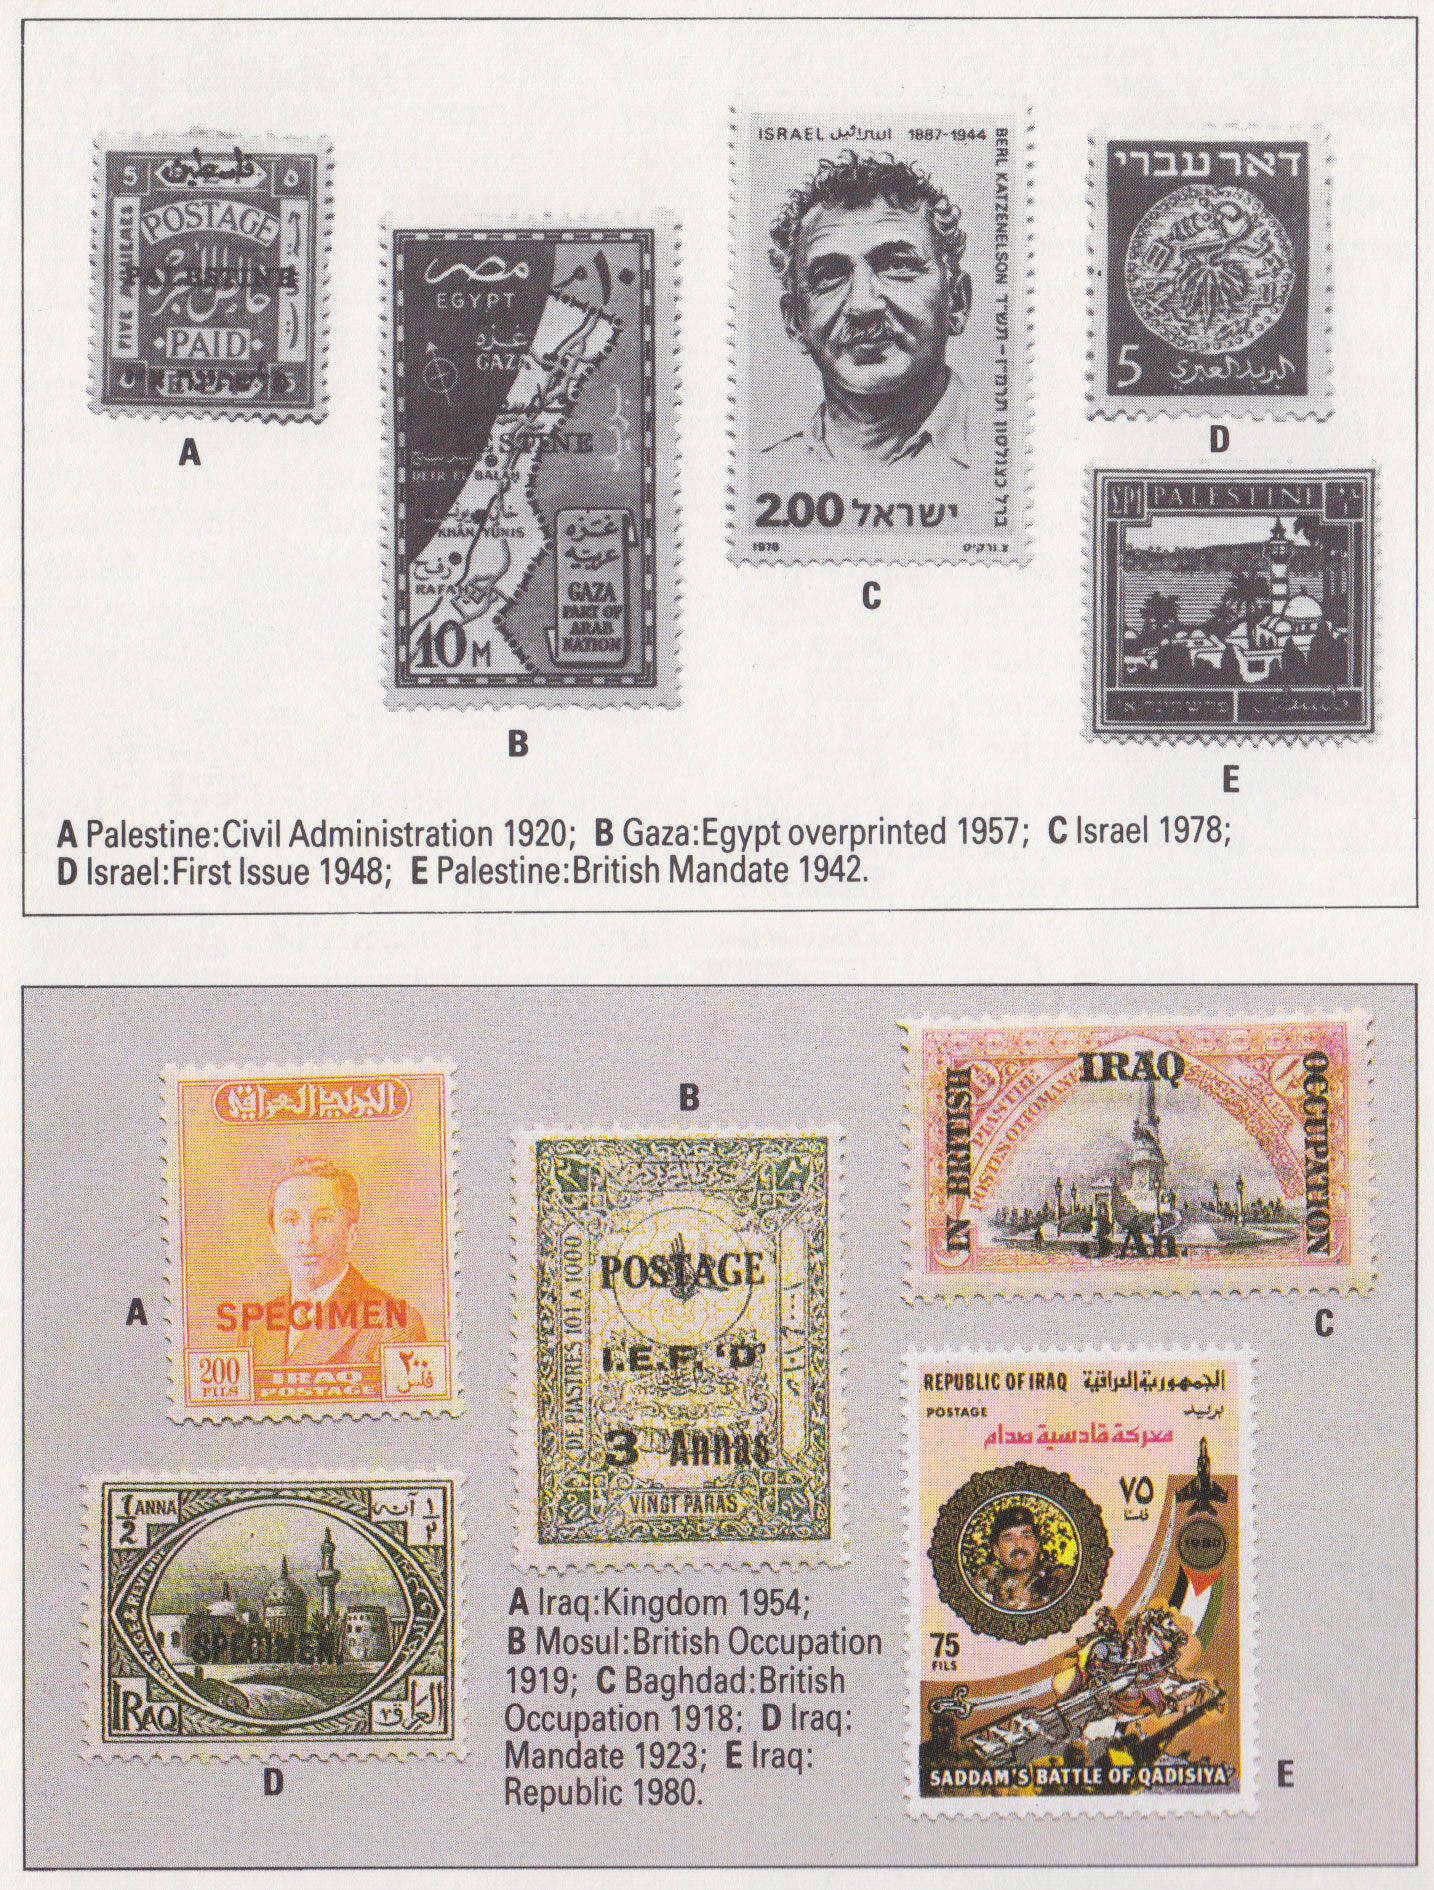 Rare Palestinian and Israeli stamps